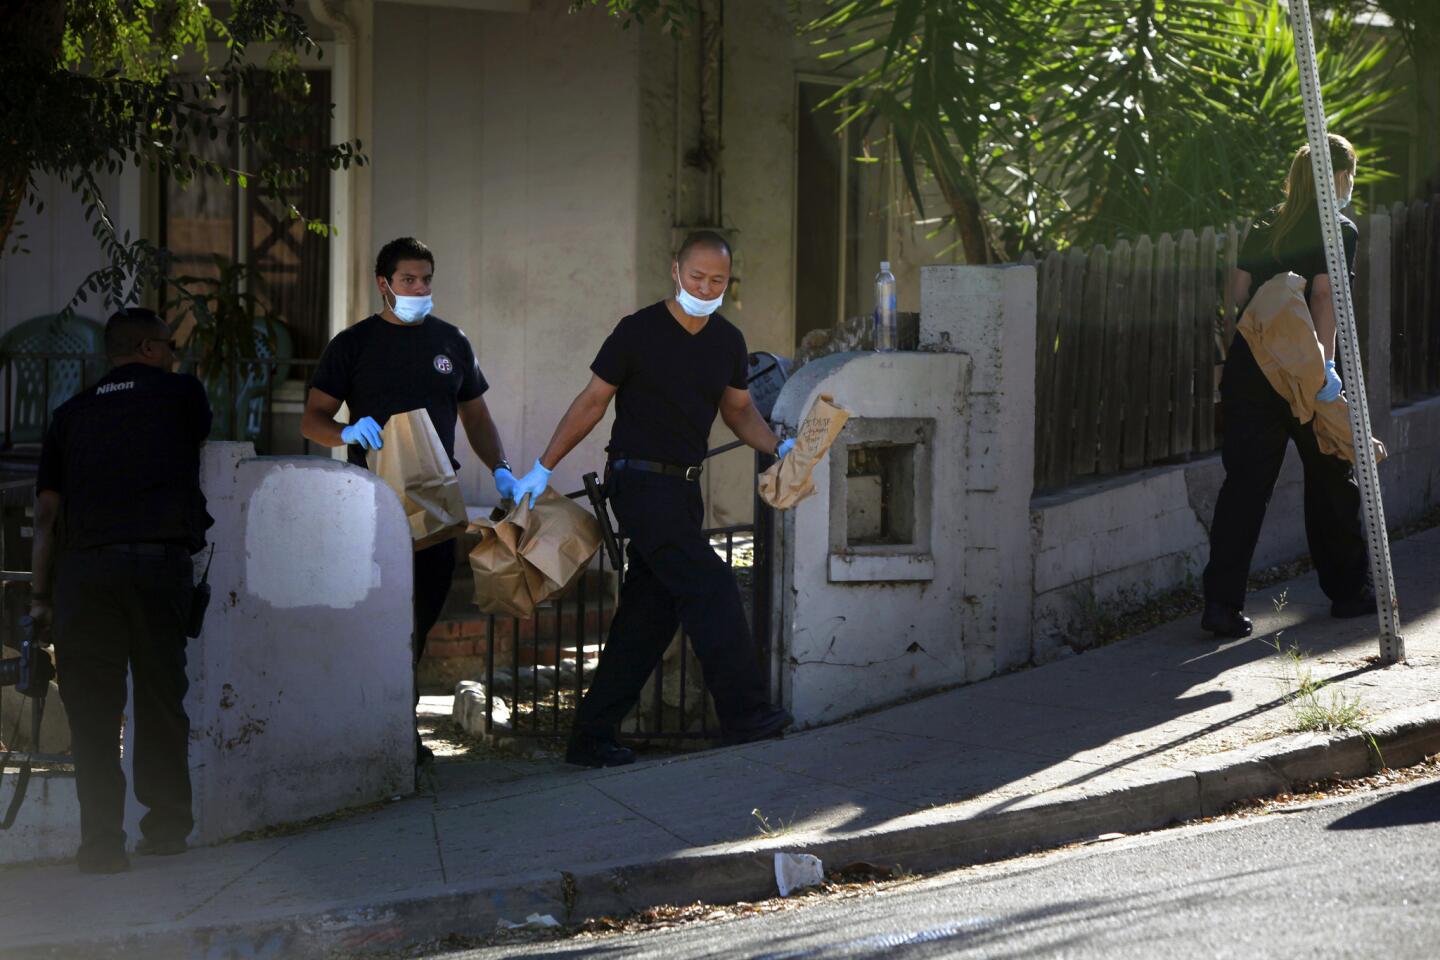 Police carry items away from a residence in the 4400 block of Topaz Street in Montecito Heights. Police served a series of search warrants in November in the neighborhood and detained some people for questioning as they continued investigating the deaths of two teenagers whose bodies were found in a park.